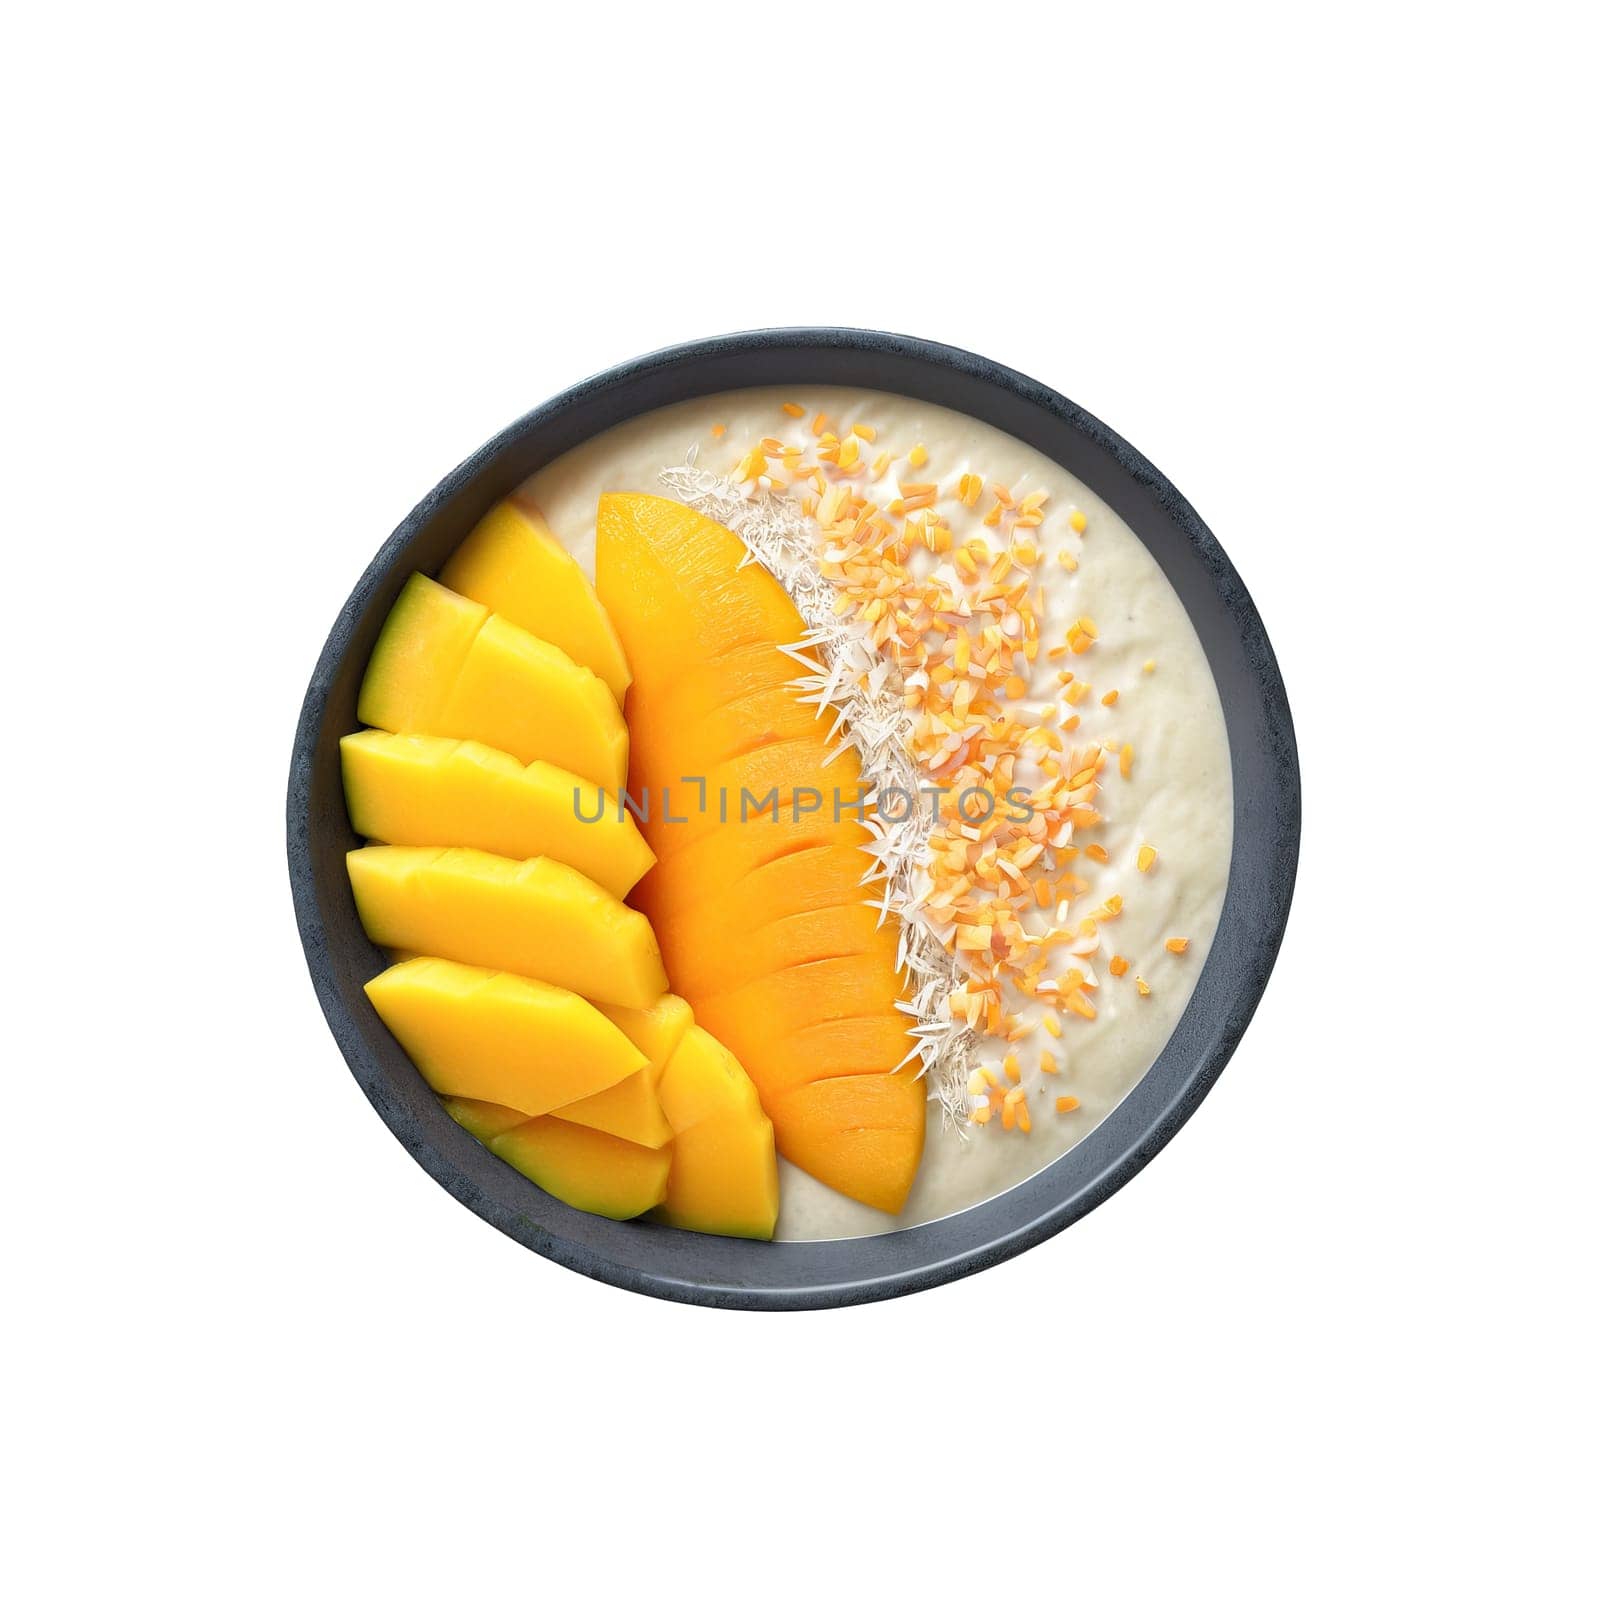 Breakfast smoothie bowl with a thick blend of frozen mango pineapple and coconut milk topped by panophotograph